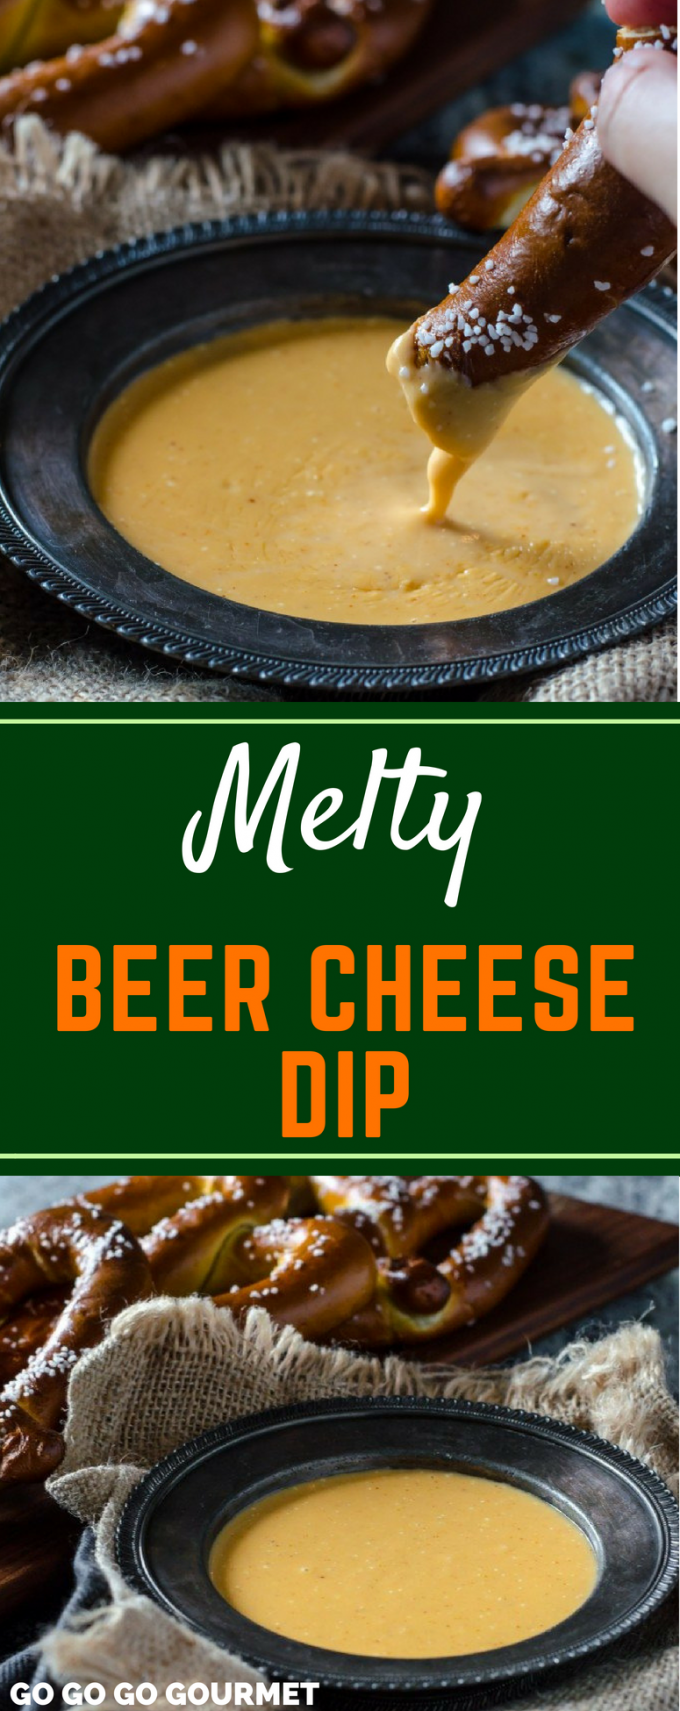 Move over Applebees, this easy Melty Beer Cheese Dip recipe is the best! This hot, melty dip is perfect for pretzels! Now that football season is here, game day food has never looked so good! #meltybeercheesedip #easyappetizerrecipes #footballfood #tailgatingfood #gogogogourmet via @gogogogourmet